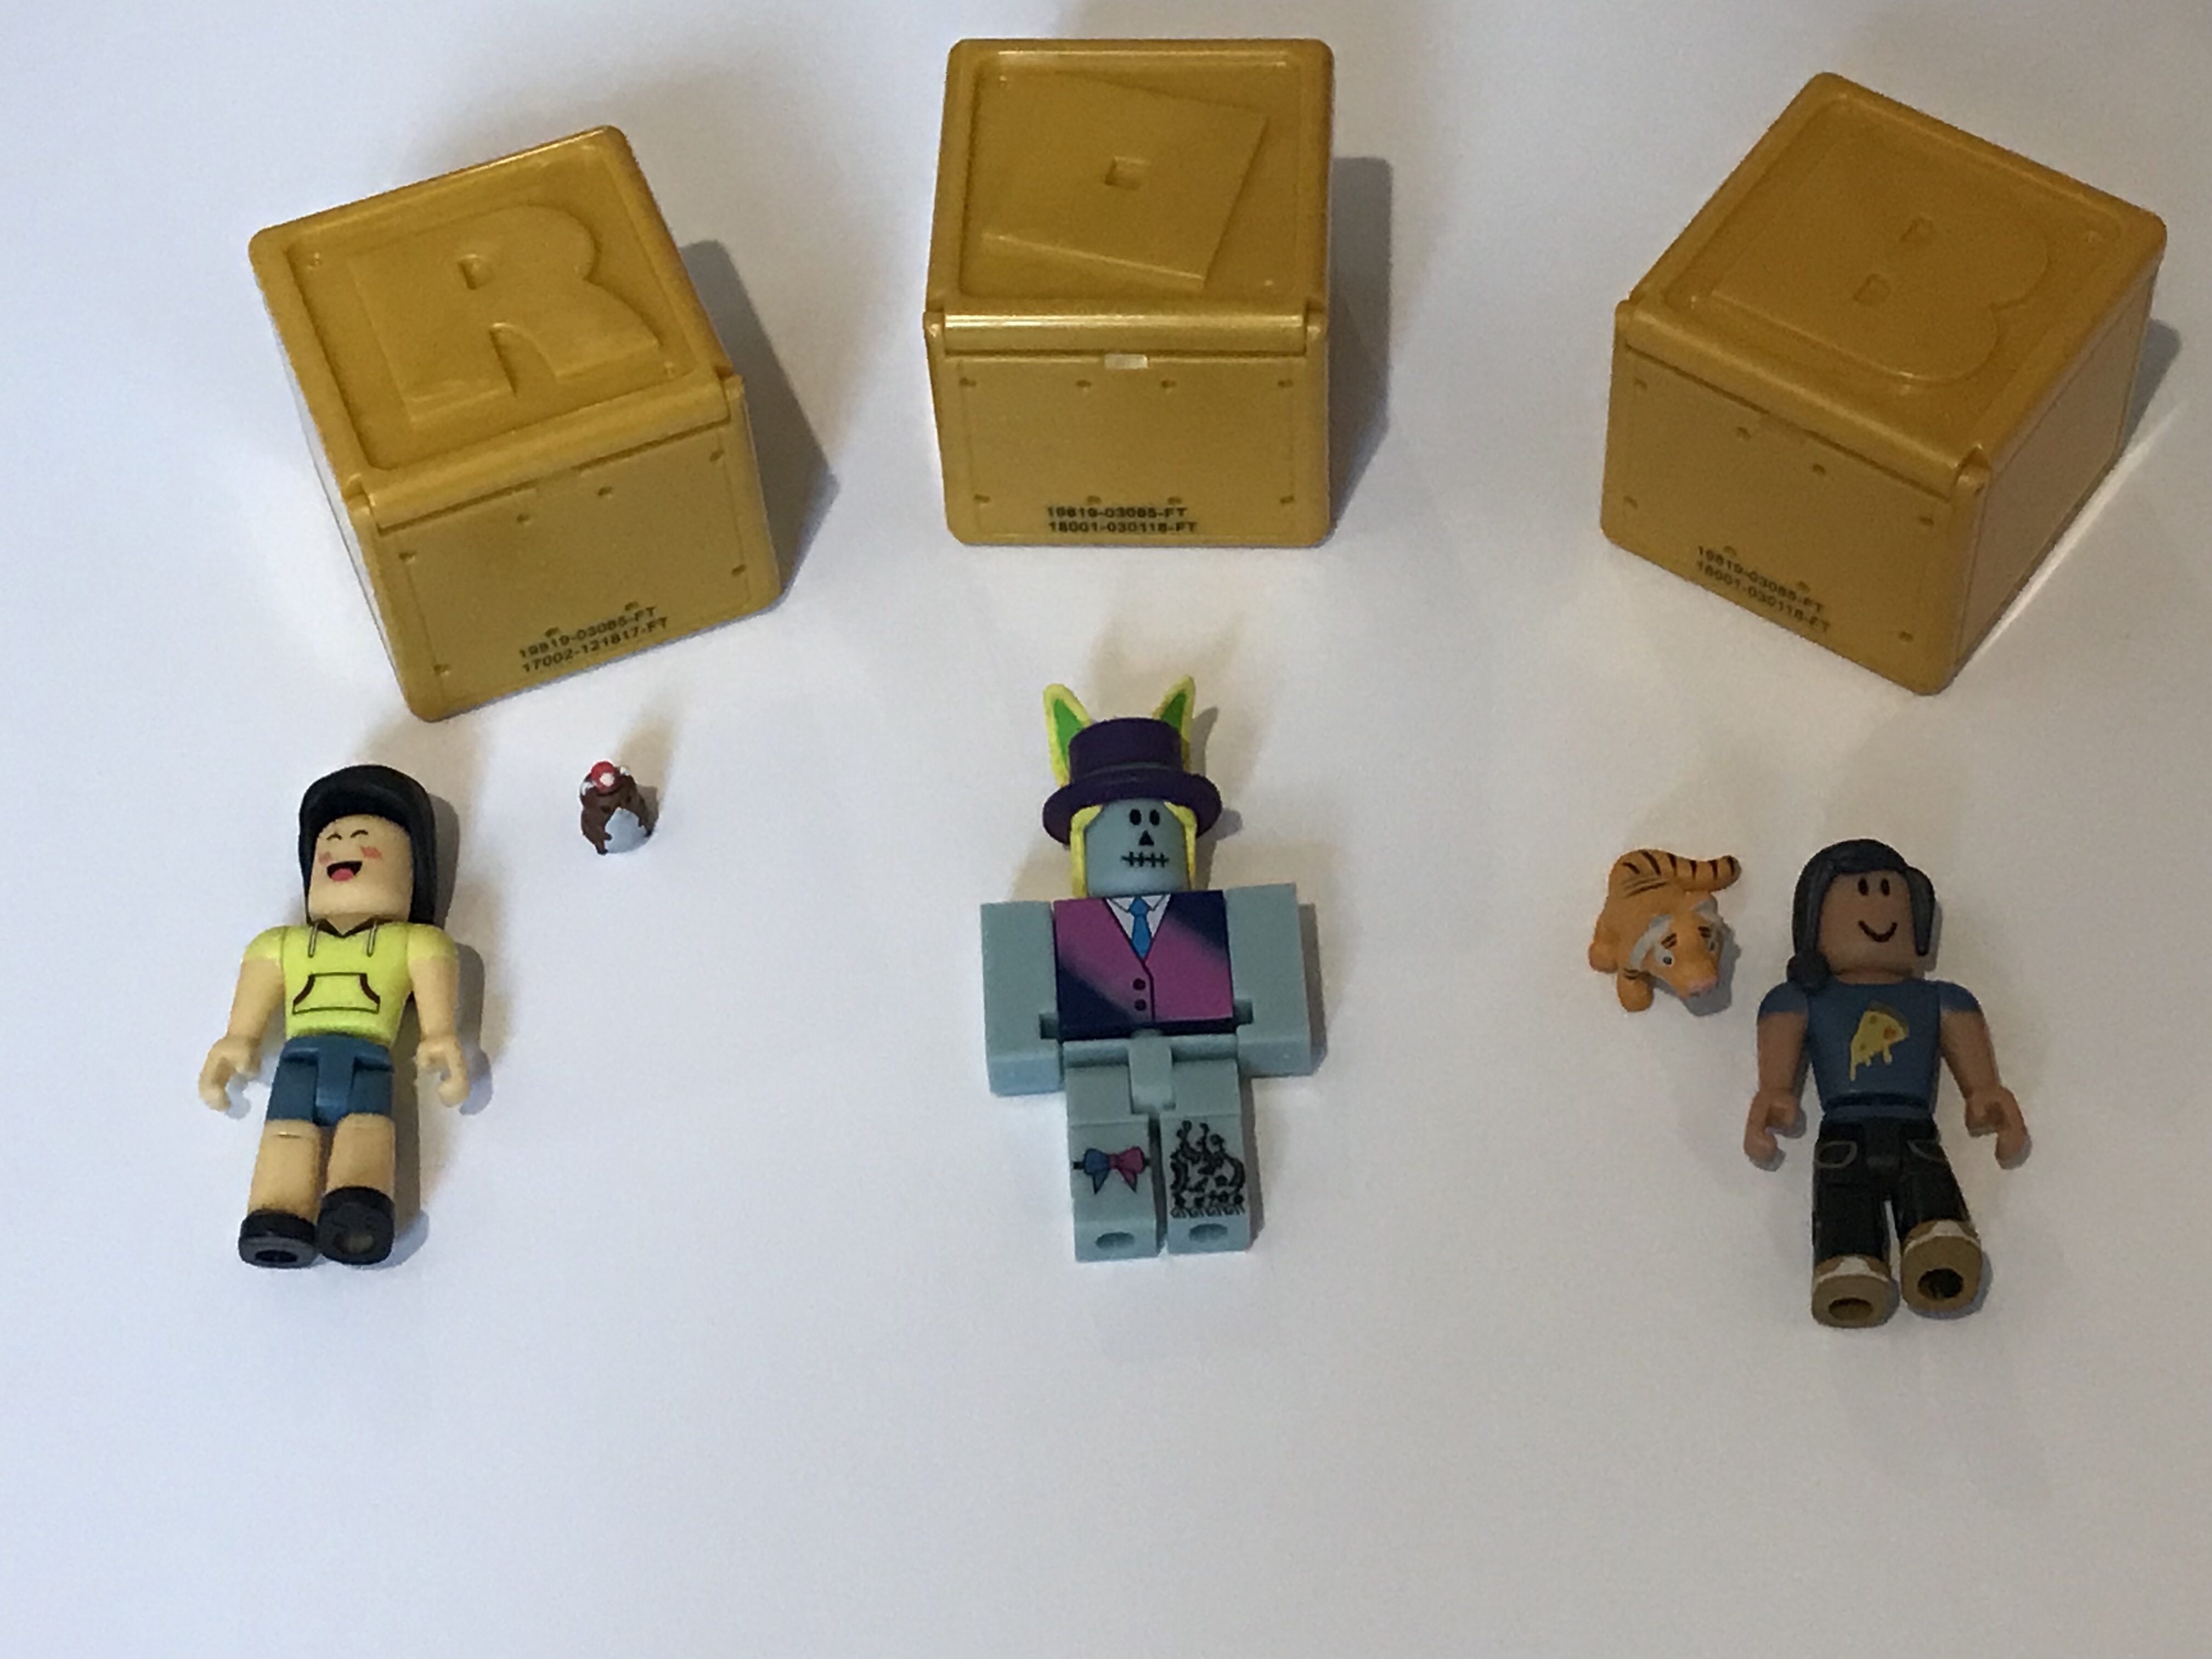 Reviewing The Roblox Celebrity Toy Range